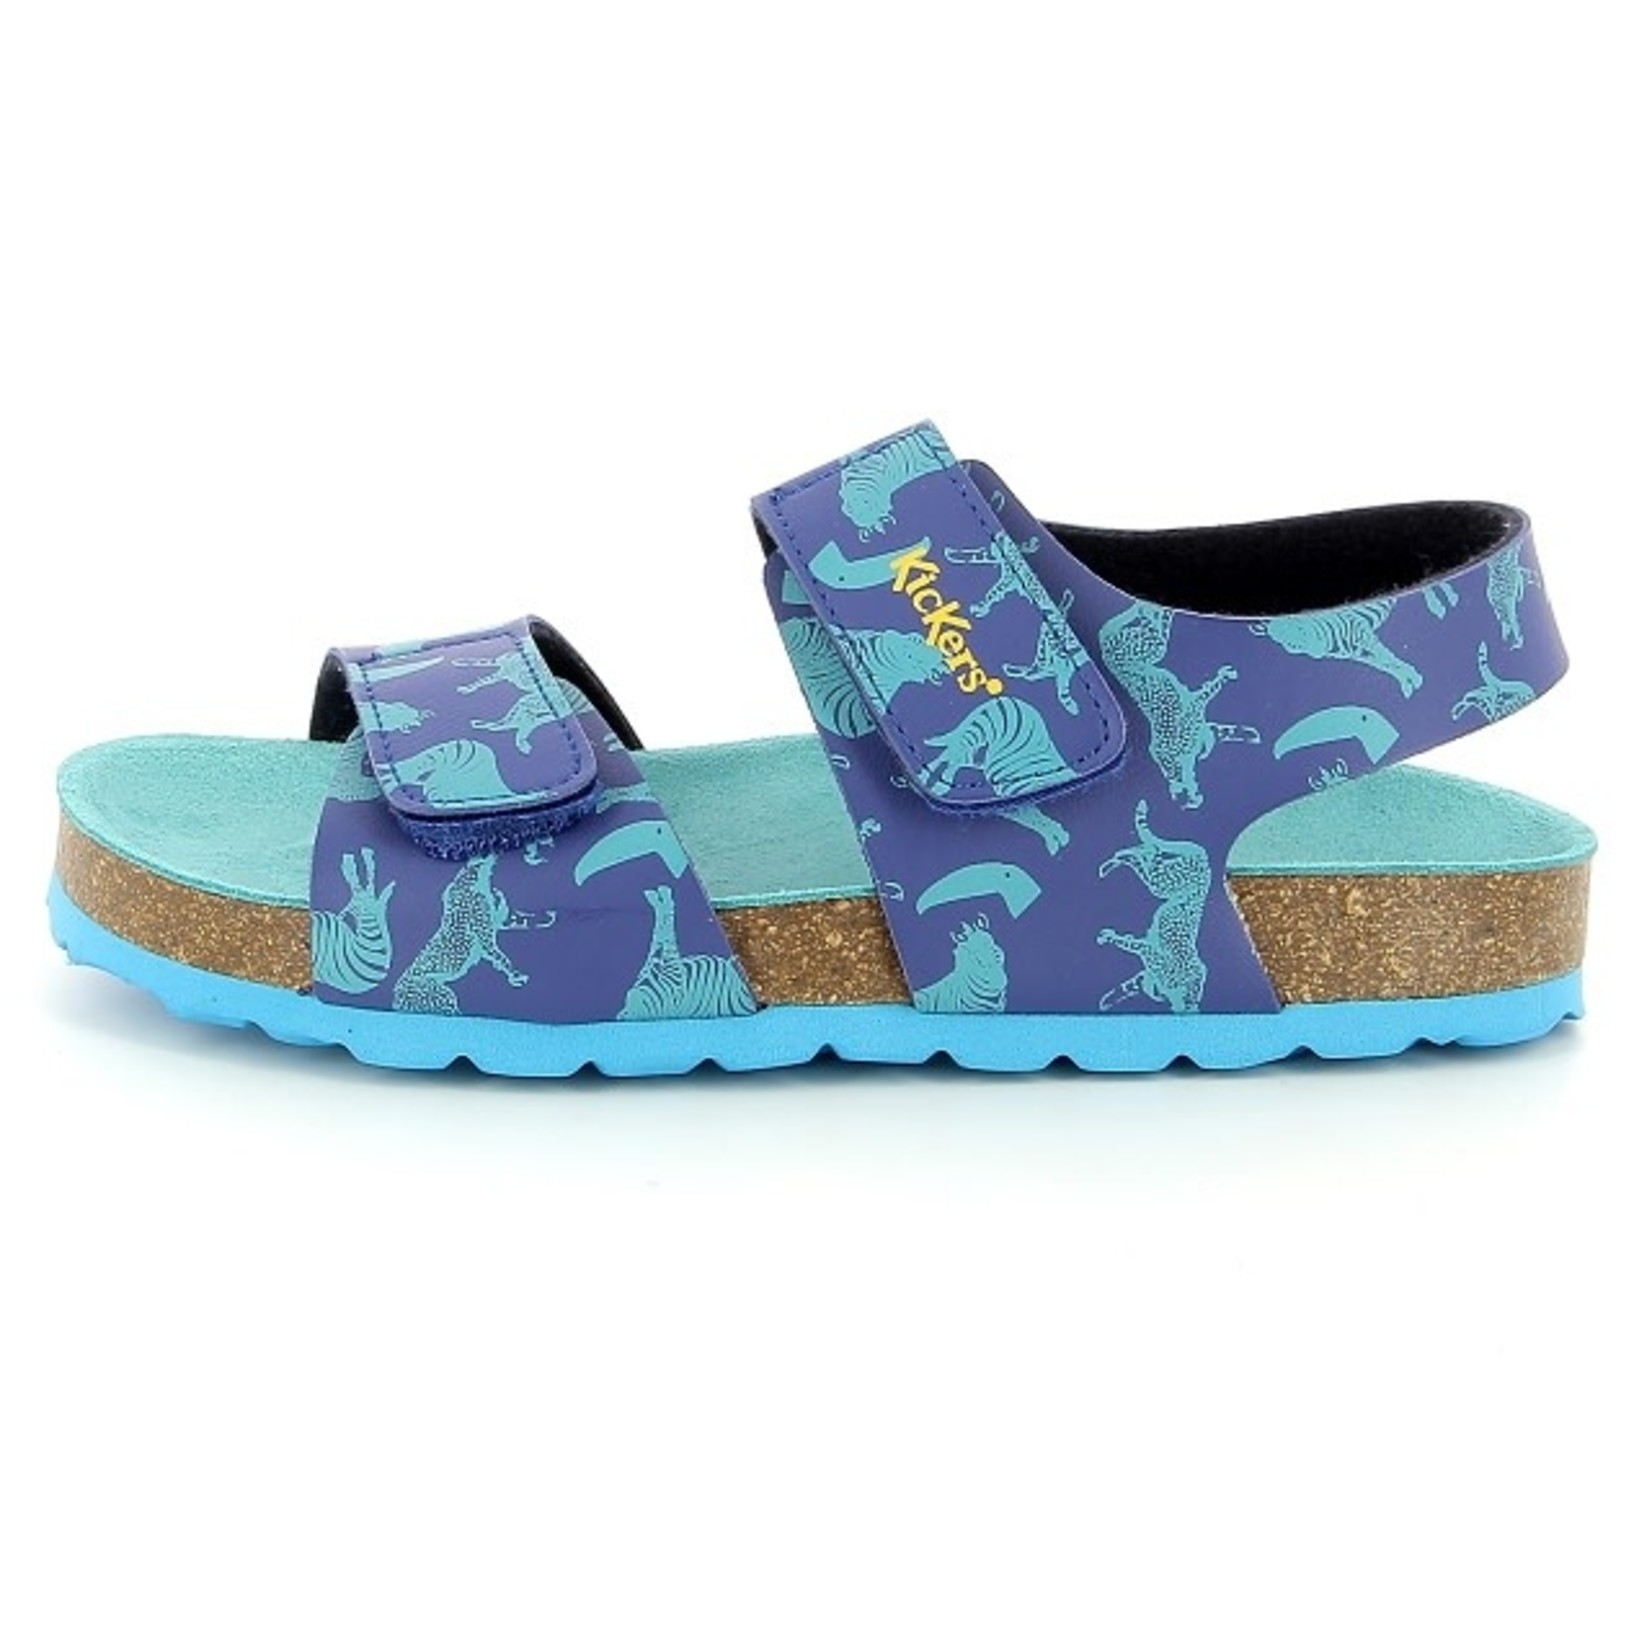 Kickers KICKERS -  Open toe sandals with cork sole 'Summerkro - Blue with turquoise print'